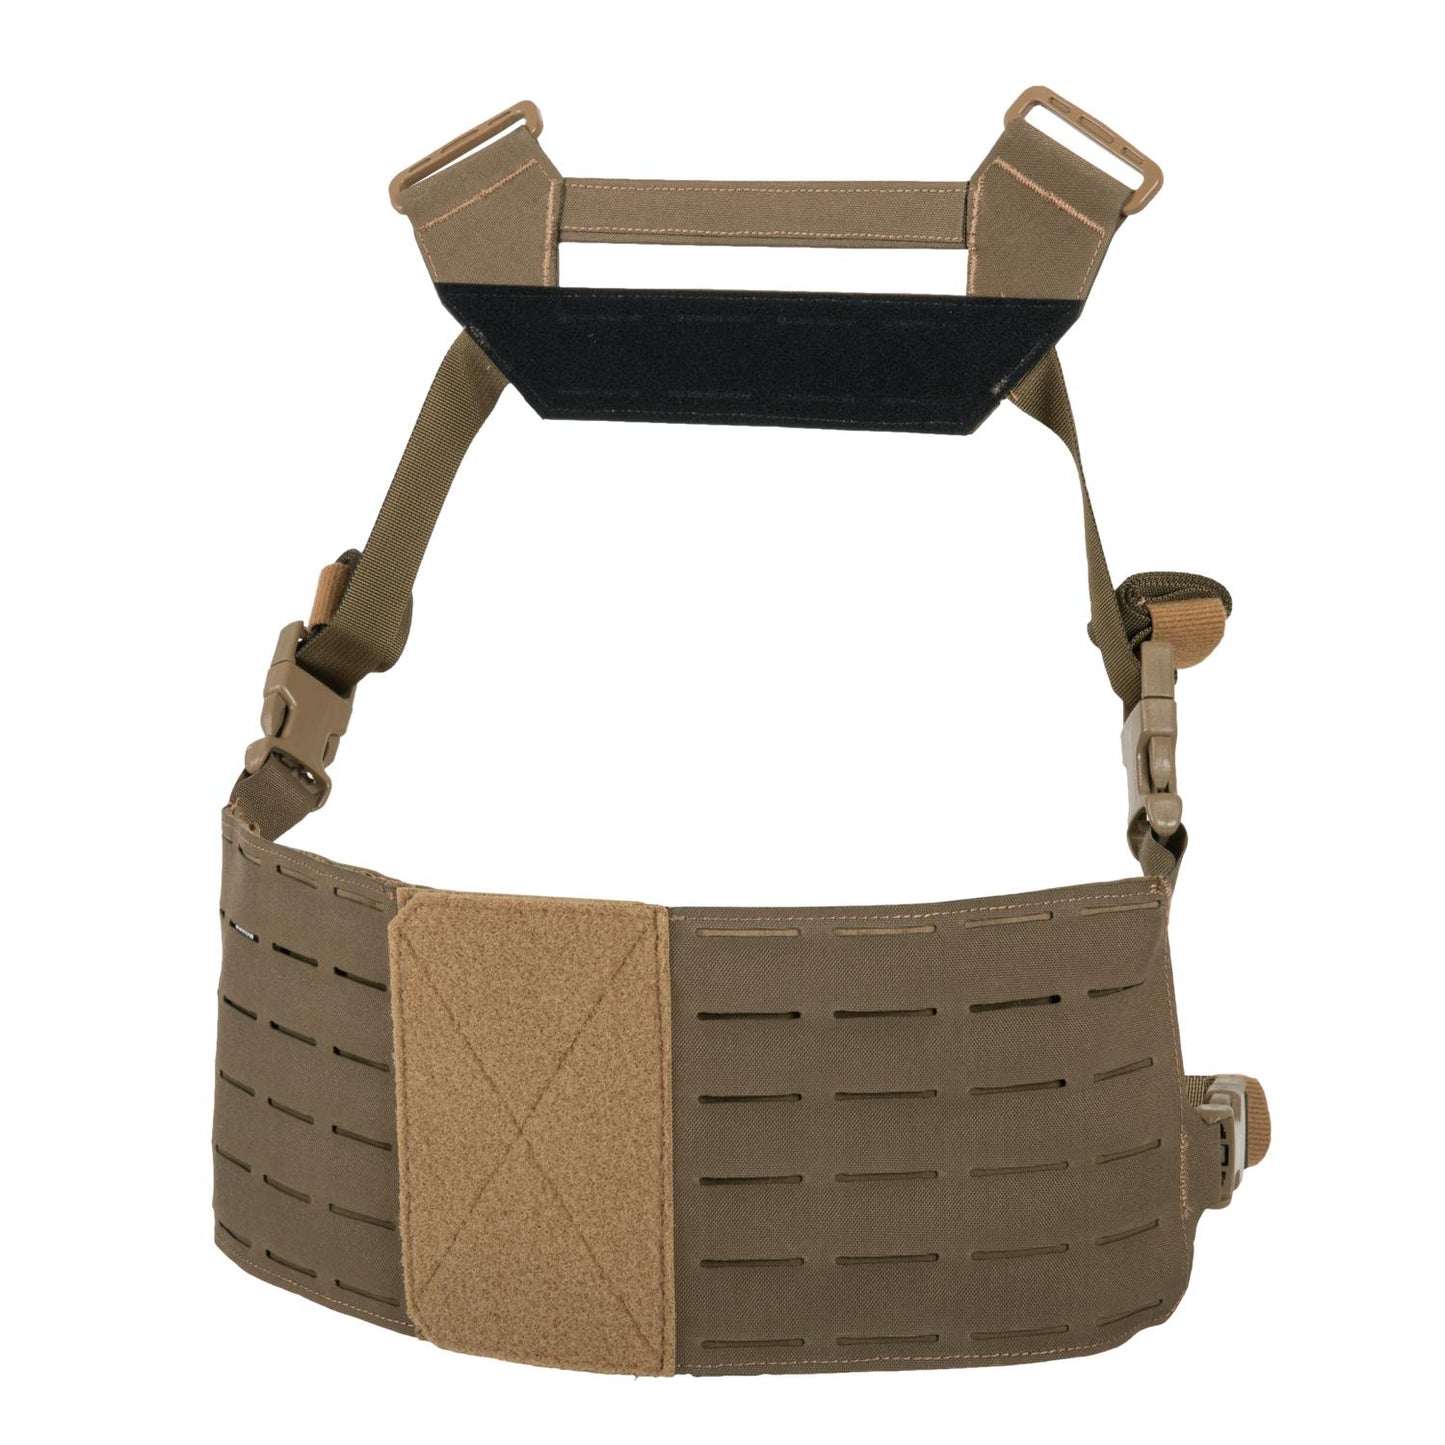 DIRECT ACTION SPITFIRE MK II CHEST RIG INTERFACE